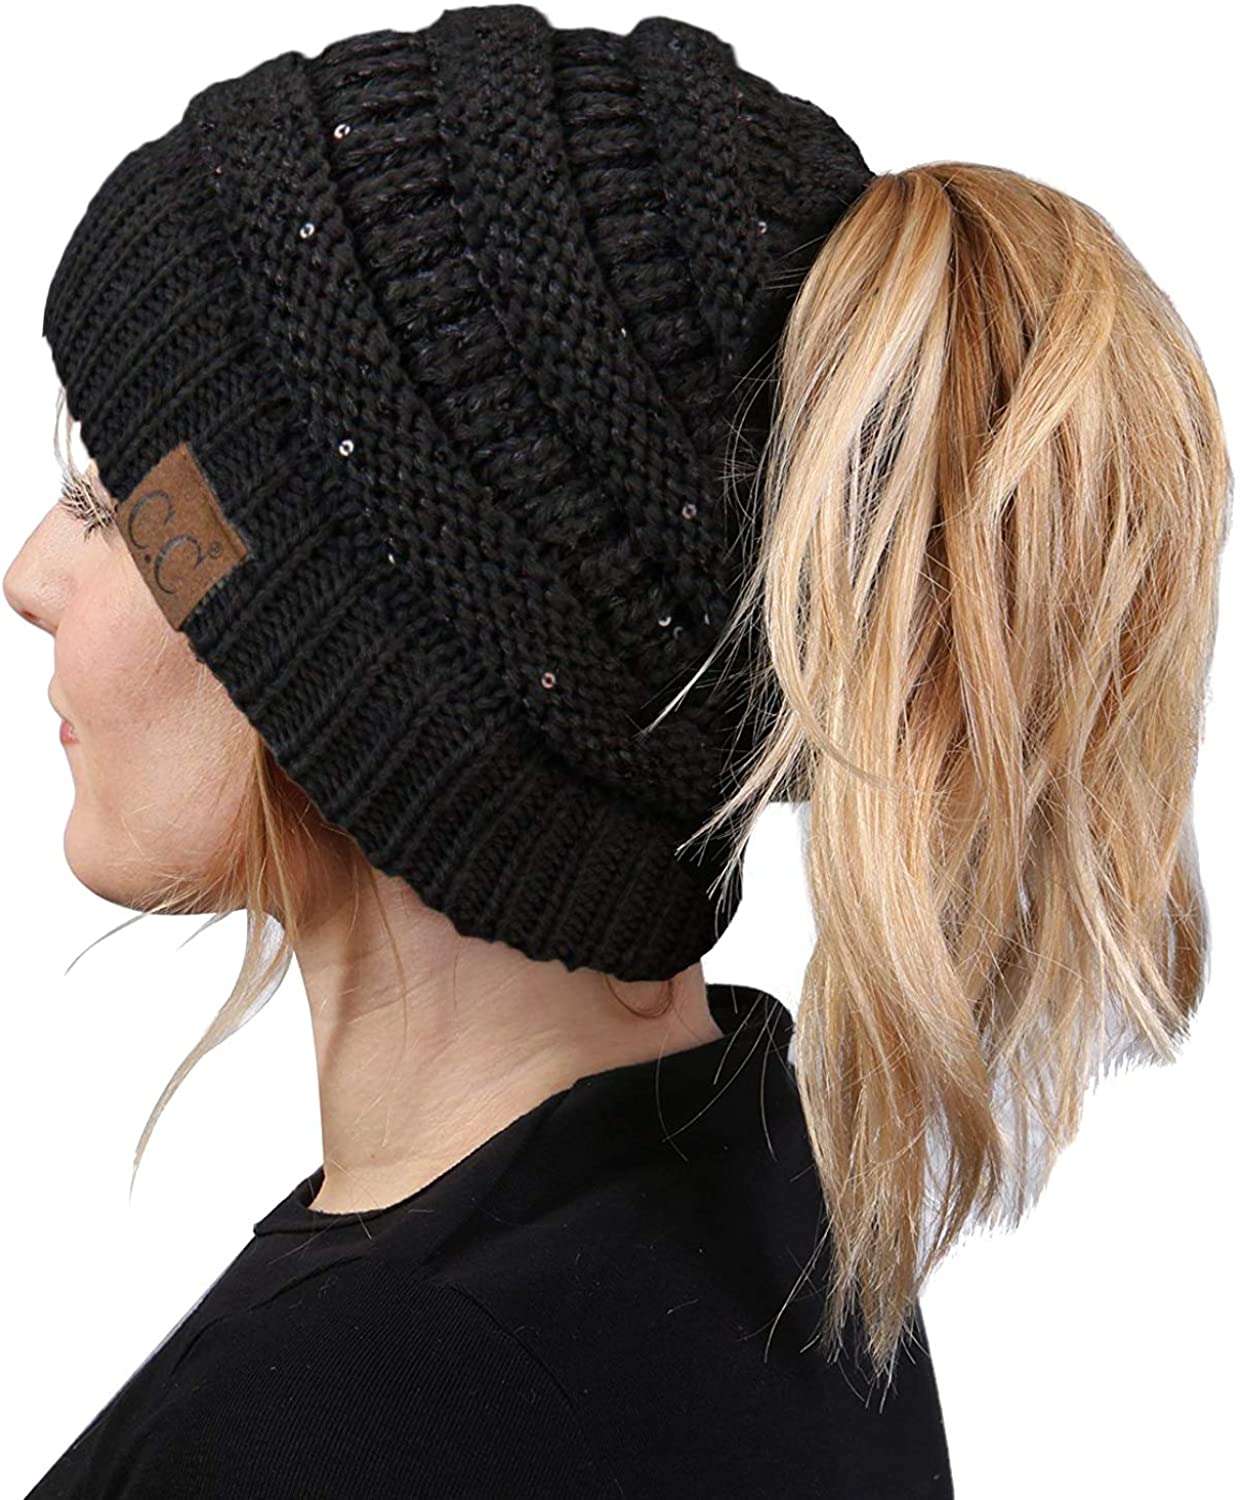 Funky Junque Exclusives BeanieTail Womens Beanie Ponytail Hat Messy Bun Skull Cap 